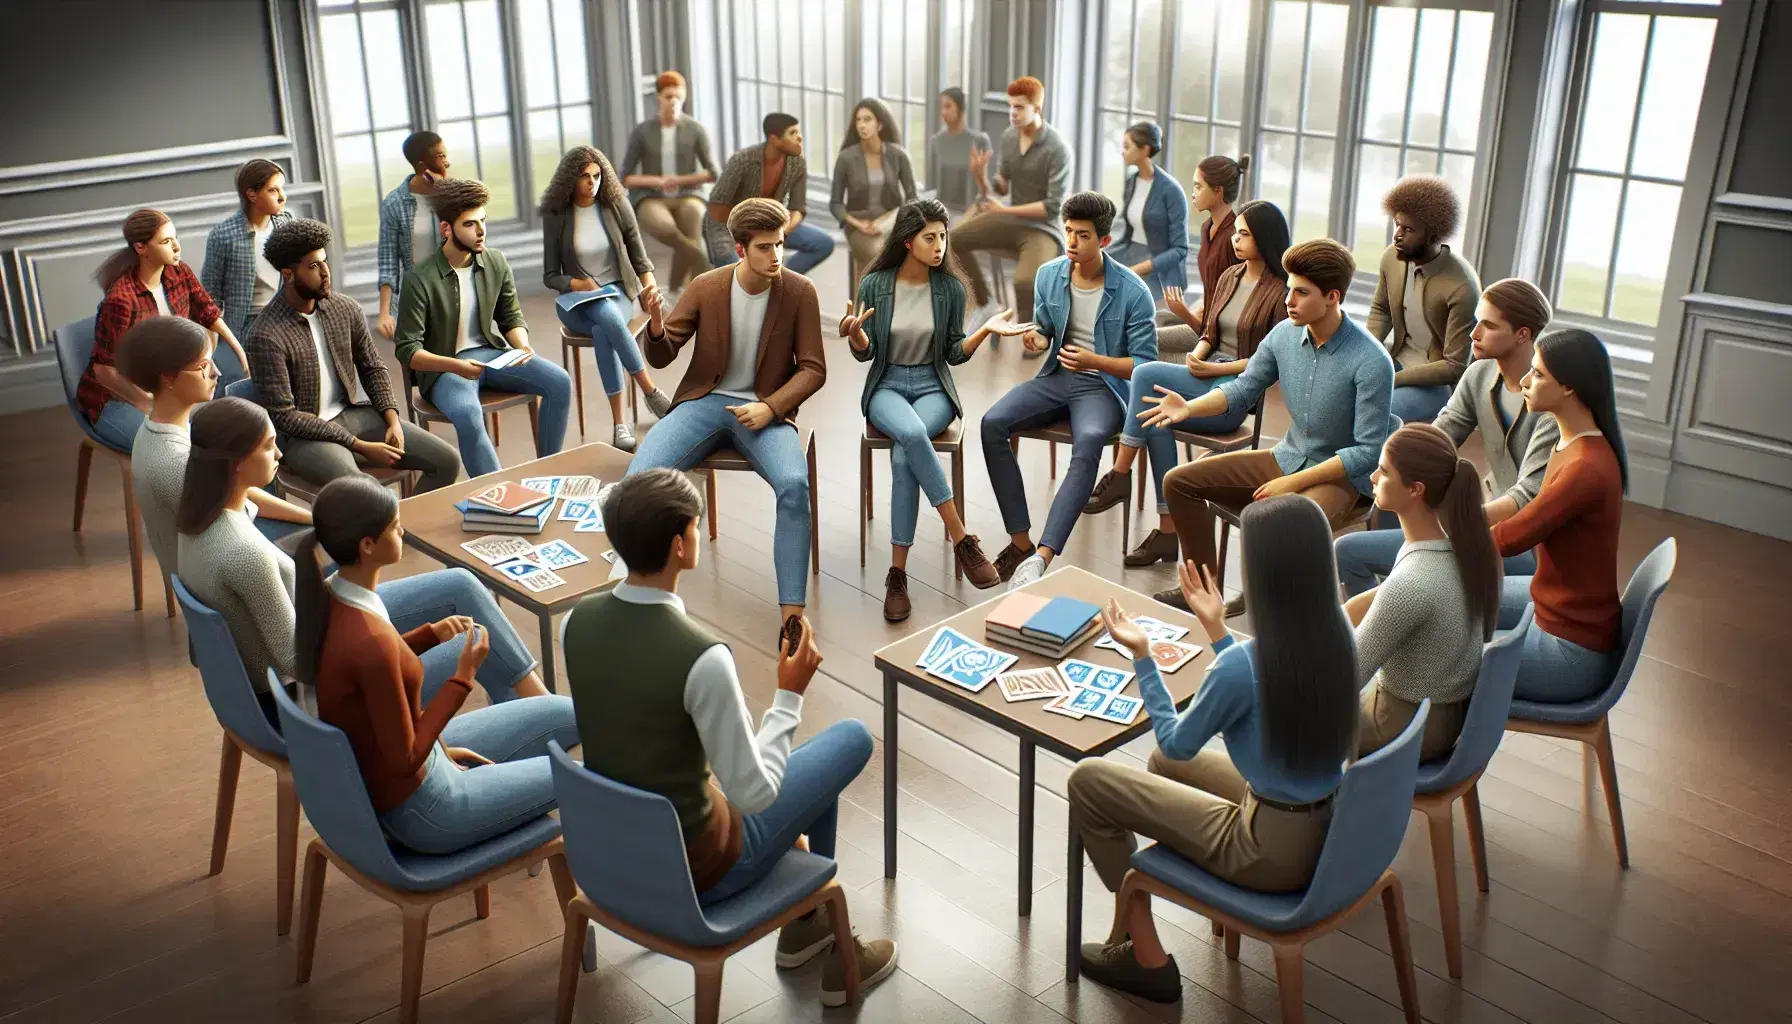 Diverse university students engage in a lively group discussion with animated gestures, standing around in a well-lit classroom promoting cooperative learning.